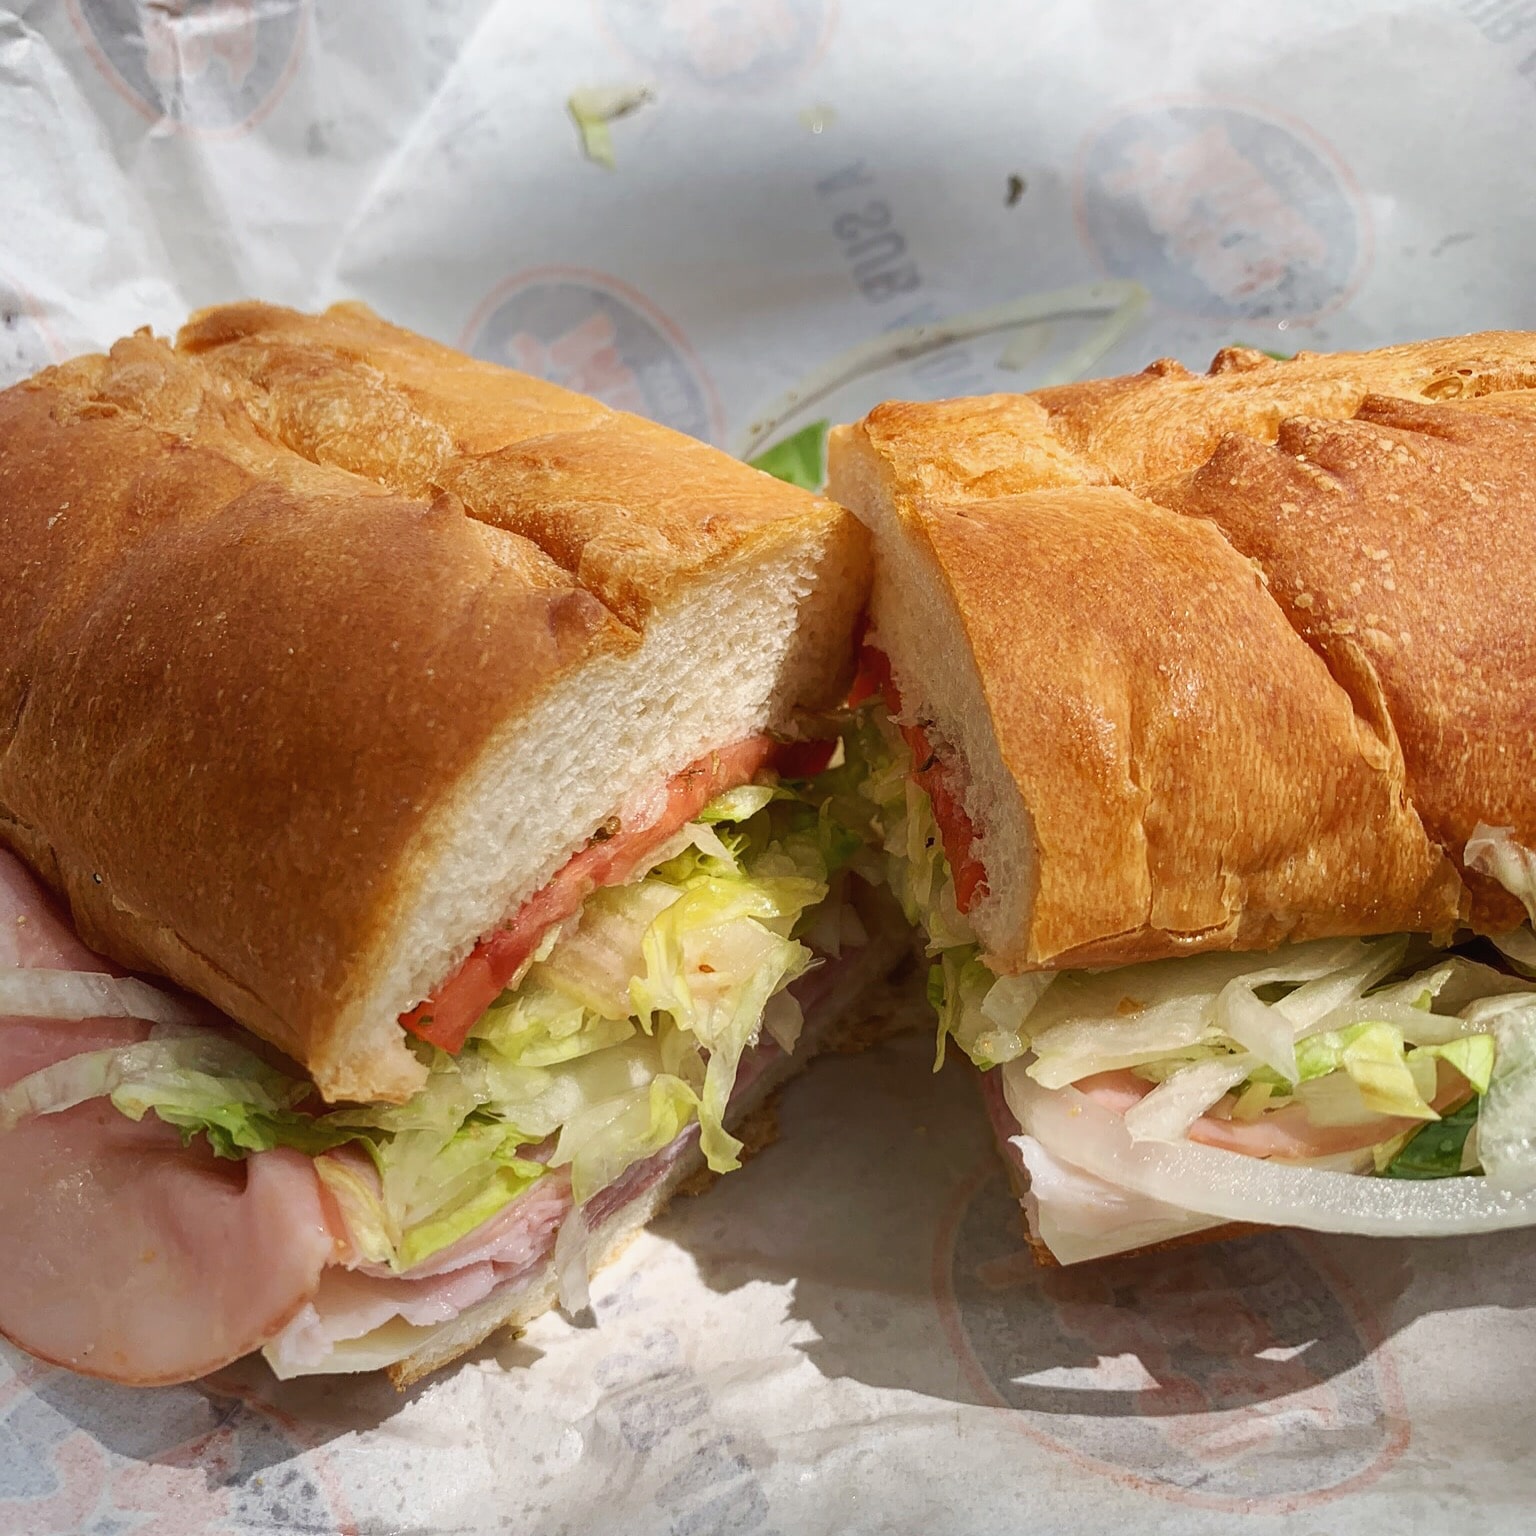 jersey mike's rosemary parmesan bread